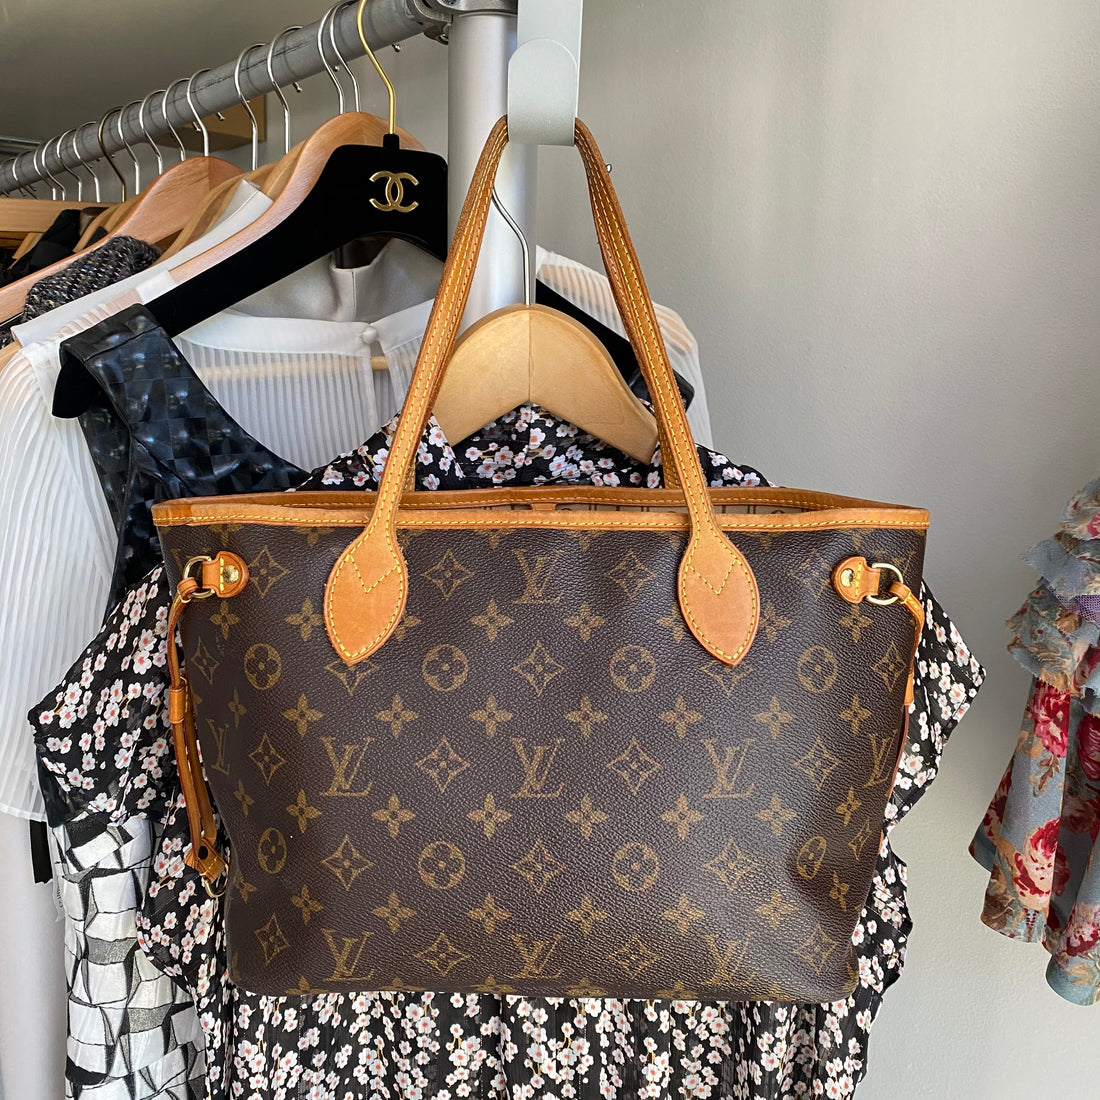 Louis Vuitton's Neverfull bag price and why you should go for it?